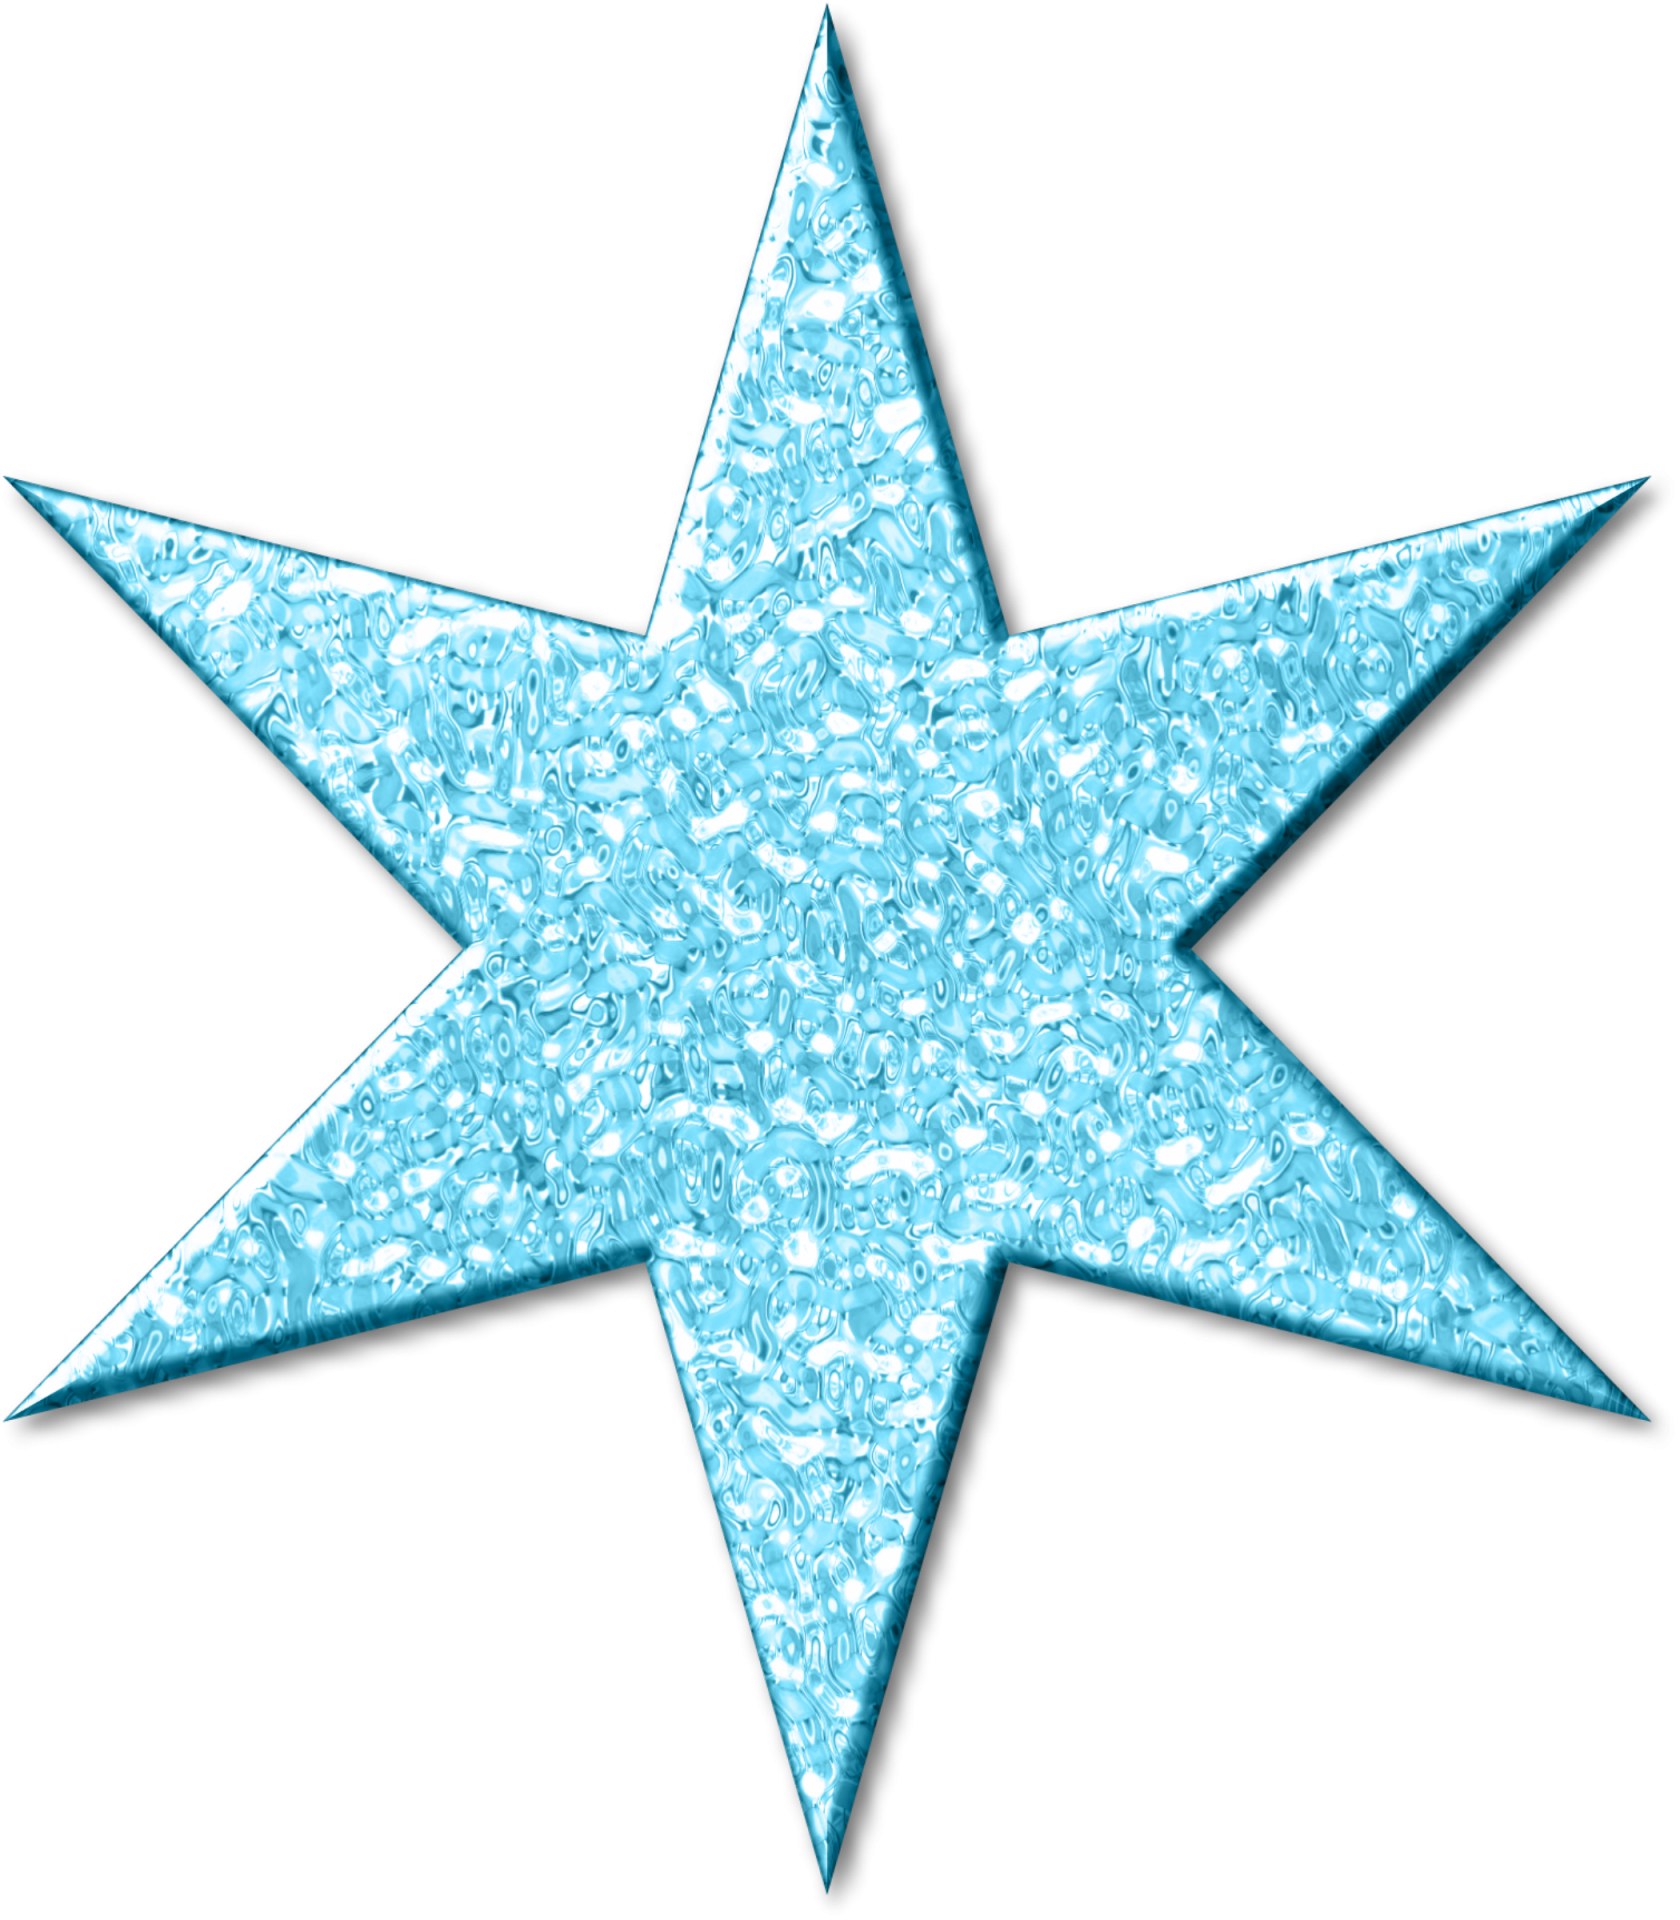 Decorative star created on the computer for scrapbooking or other textured drops of water on a transparent background